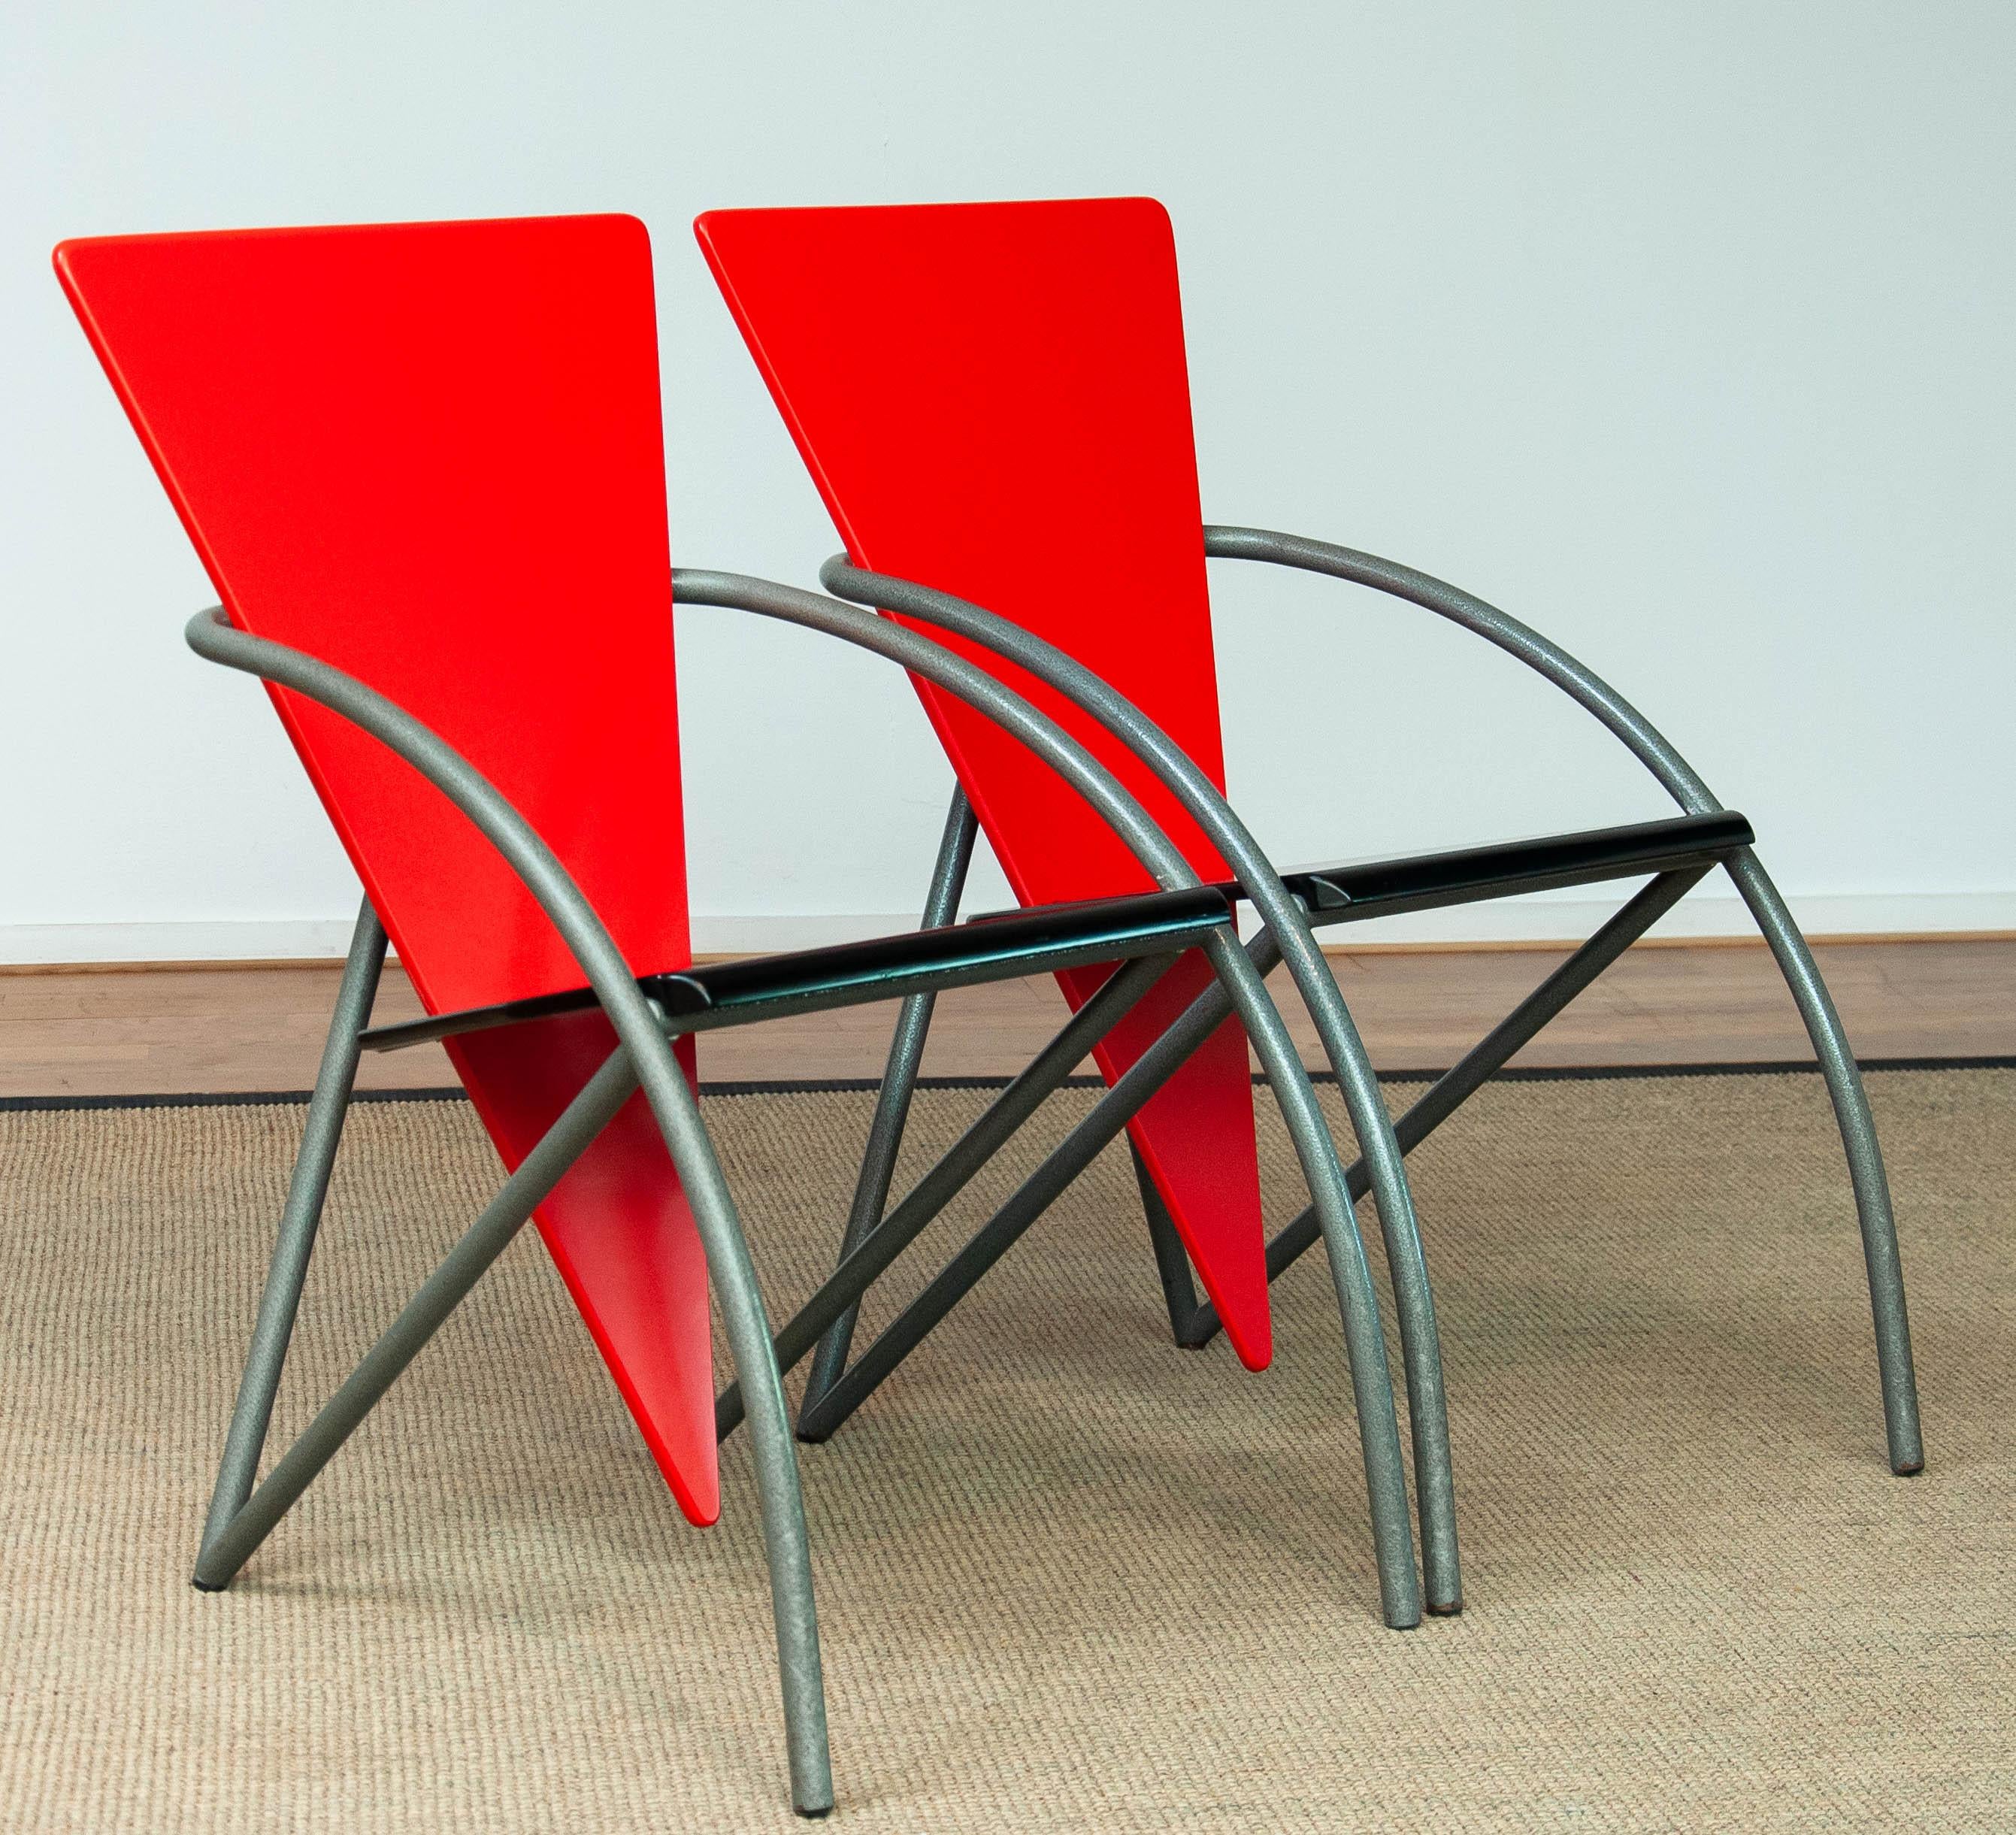 Late 20th Century 80's Pair Post-Modern Dining Office Chairs in Red and Black by Klaus Wettergren For Sale